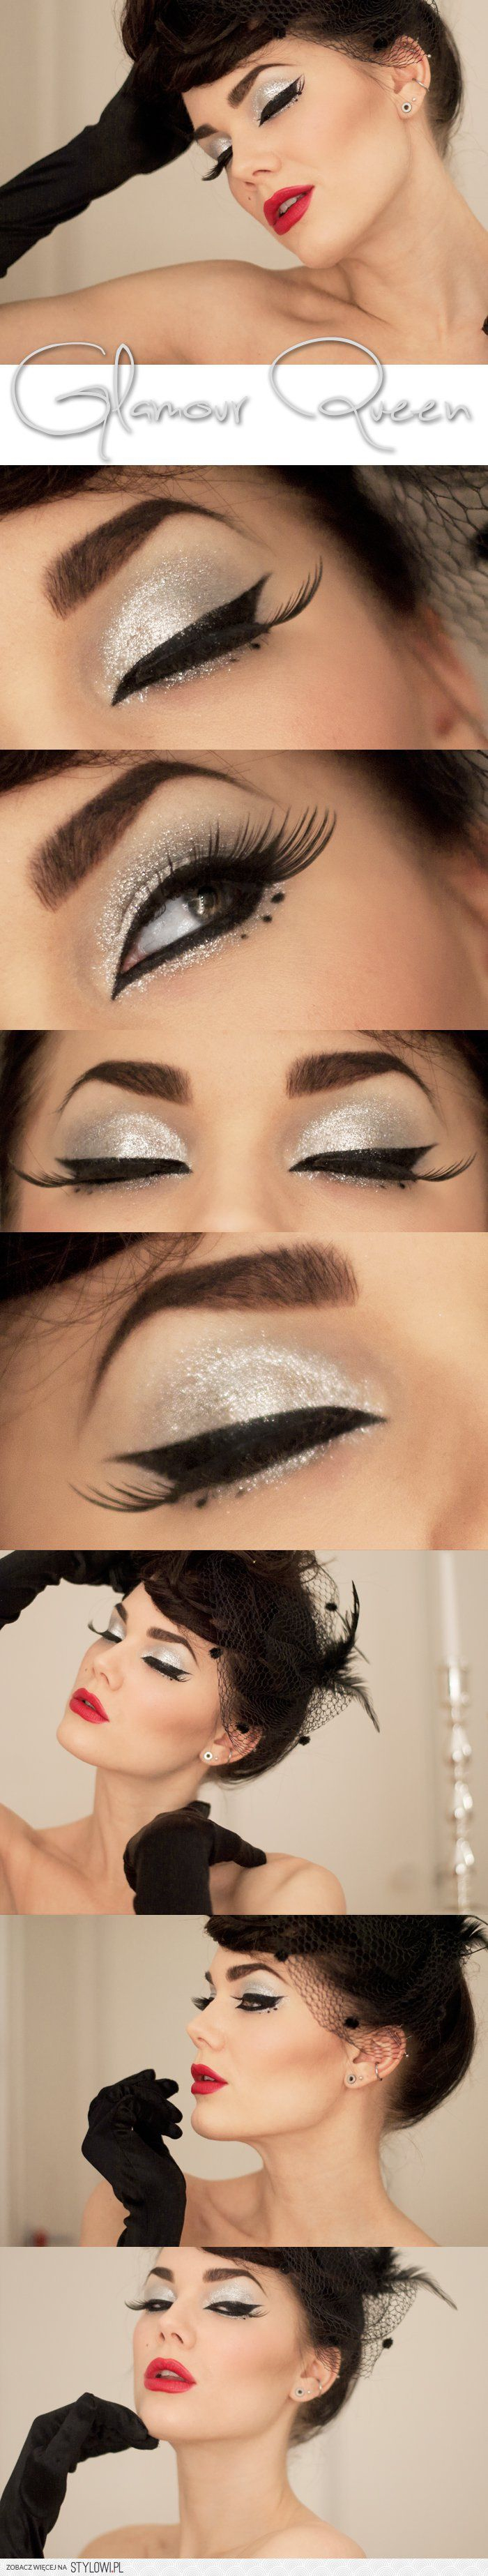 Sparkly Eye Makeup Glitter Eye Makeup Tutorials Are Quite Easy To Achieve